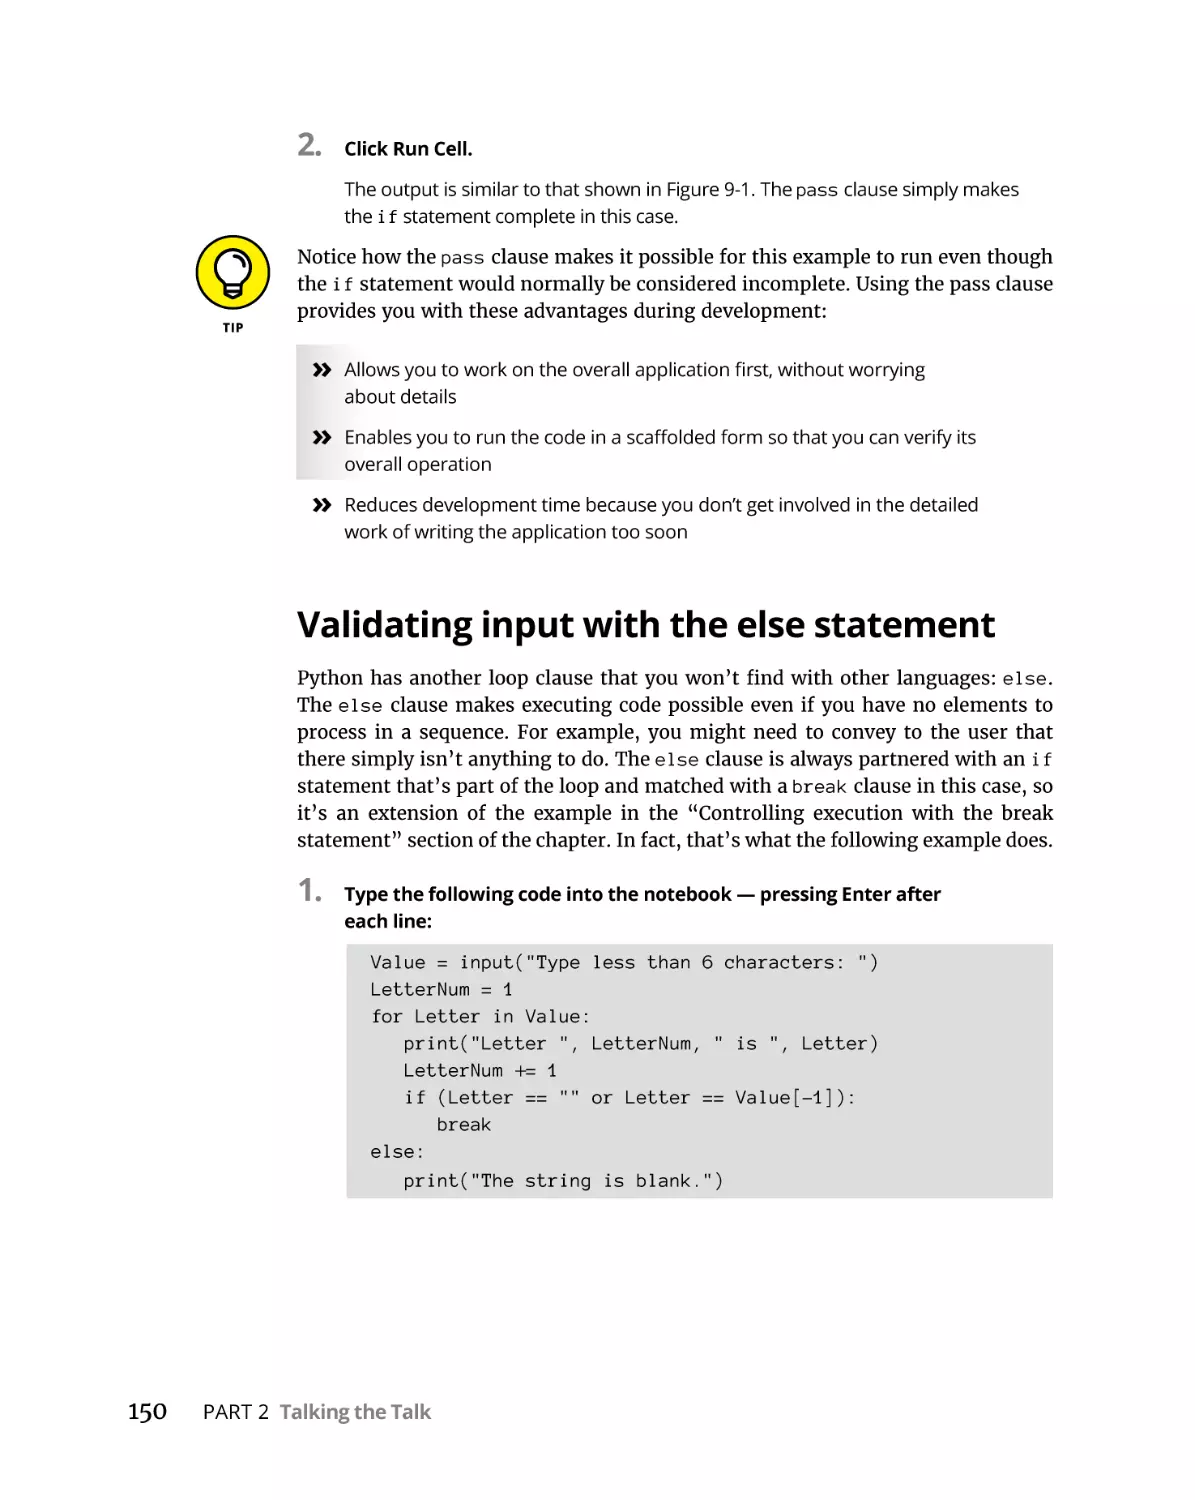 Validating input with the else statement